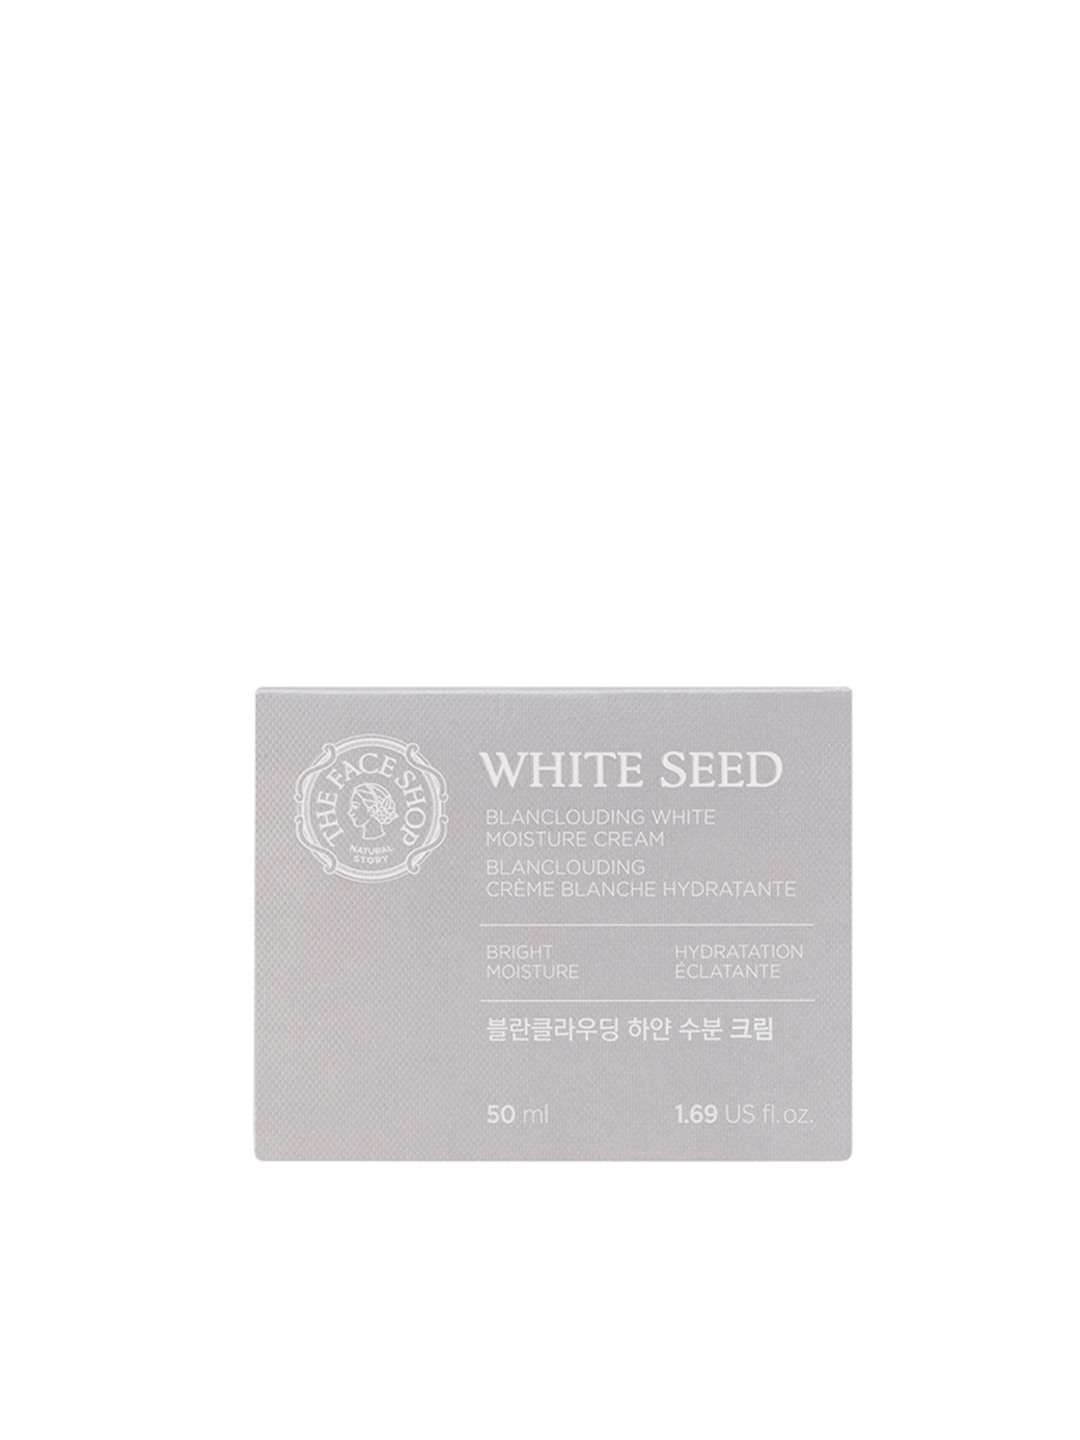 The Face Shop White Seed Blanclouding White Moisture Cream 50ml